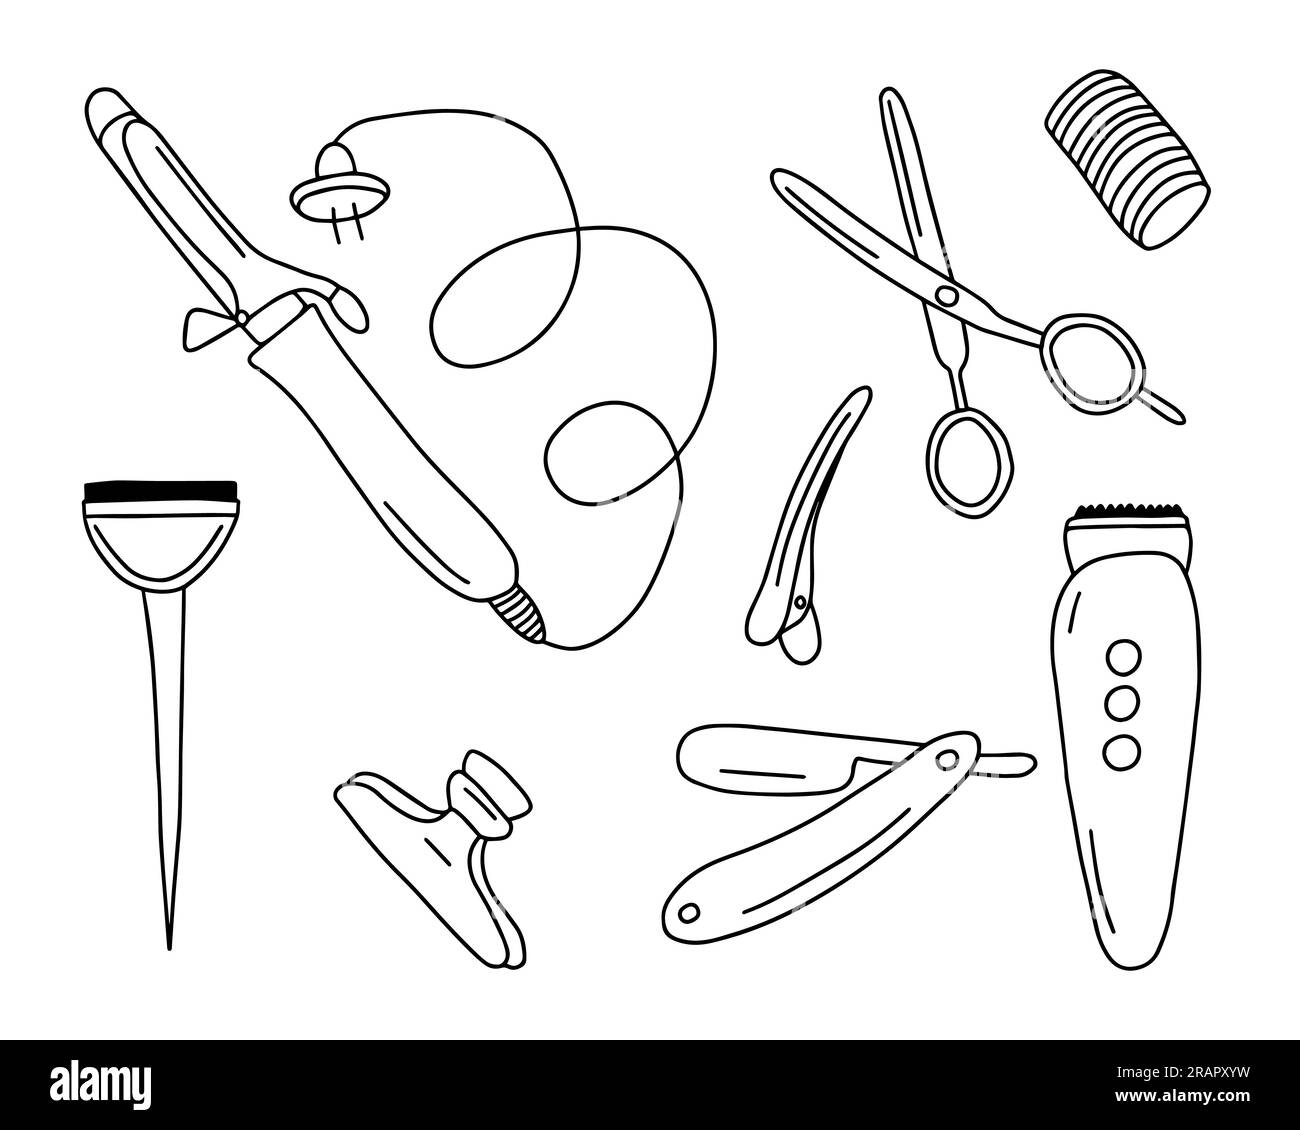 Doodle set of different hairdressing supplies Stock Vector